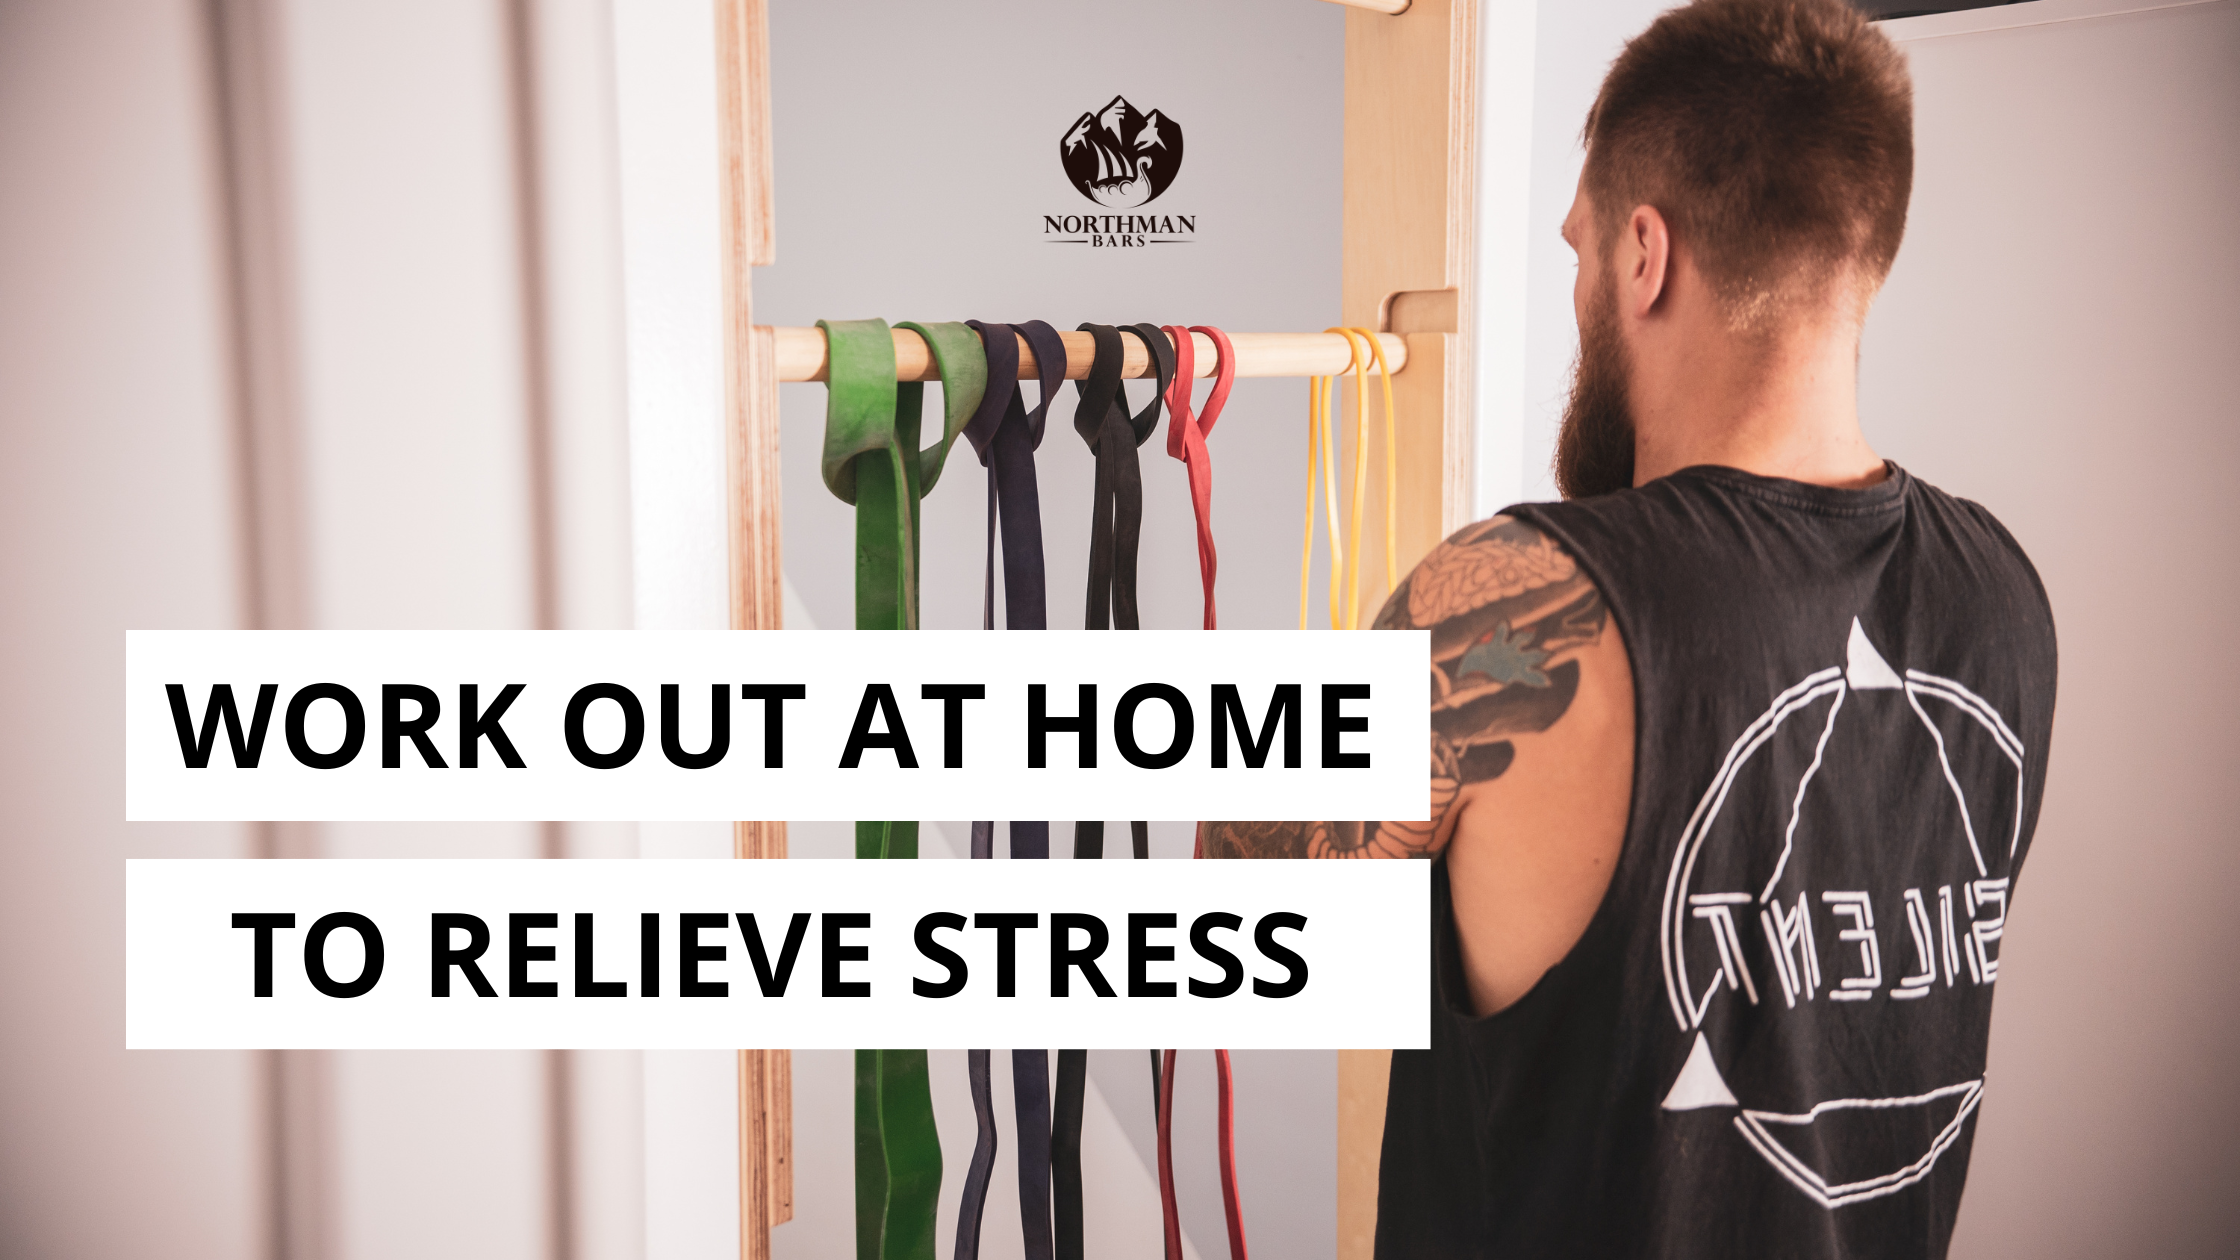 Create a habit of exercising at home to relieve stress